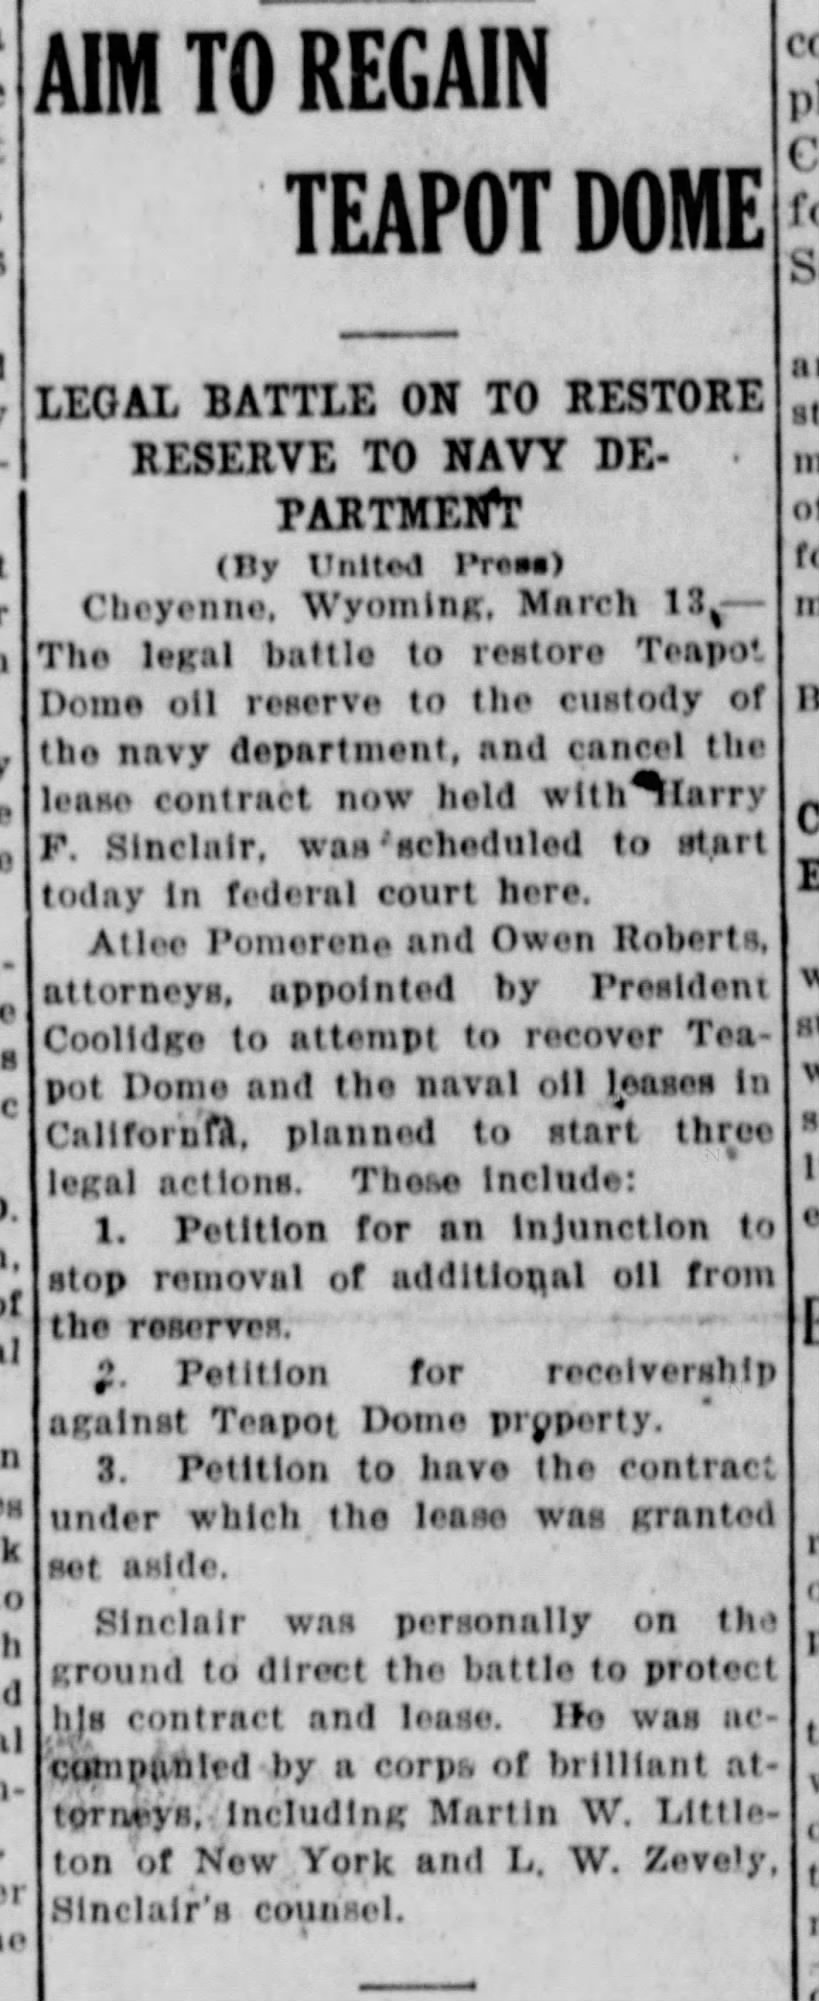 Legal battle to restore Teapot Dome to federal government to begin